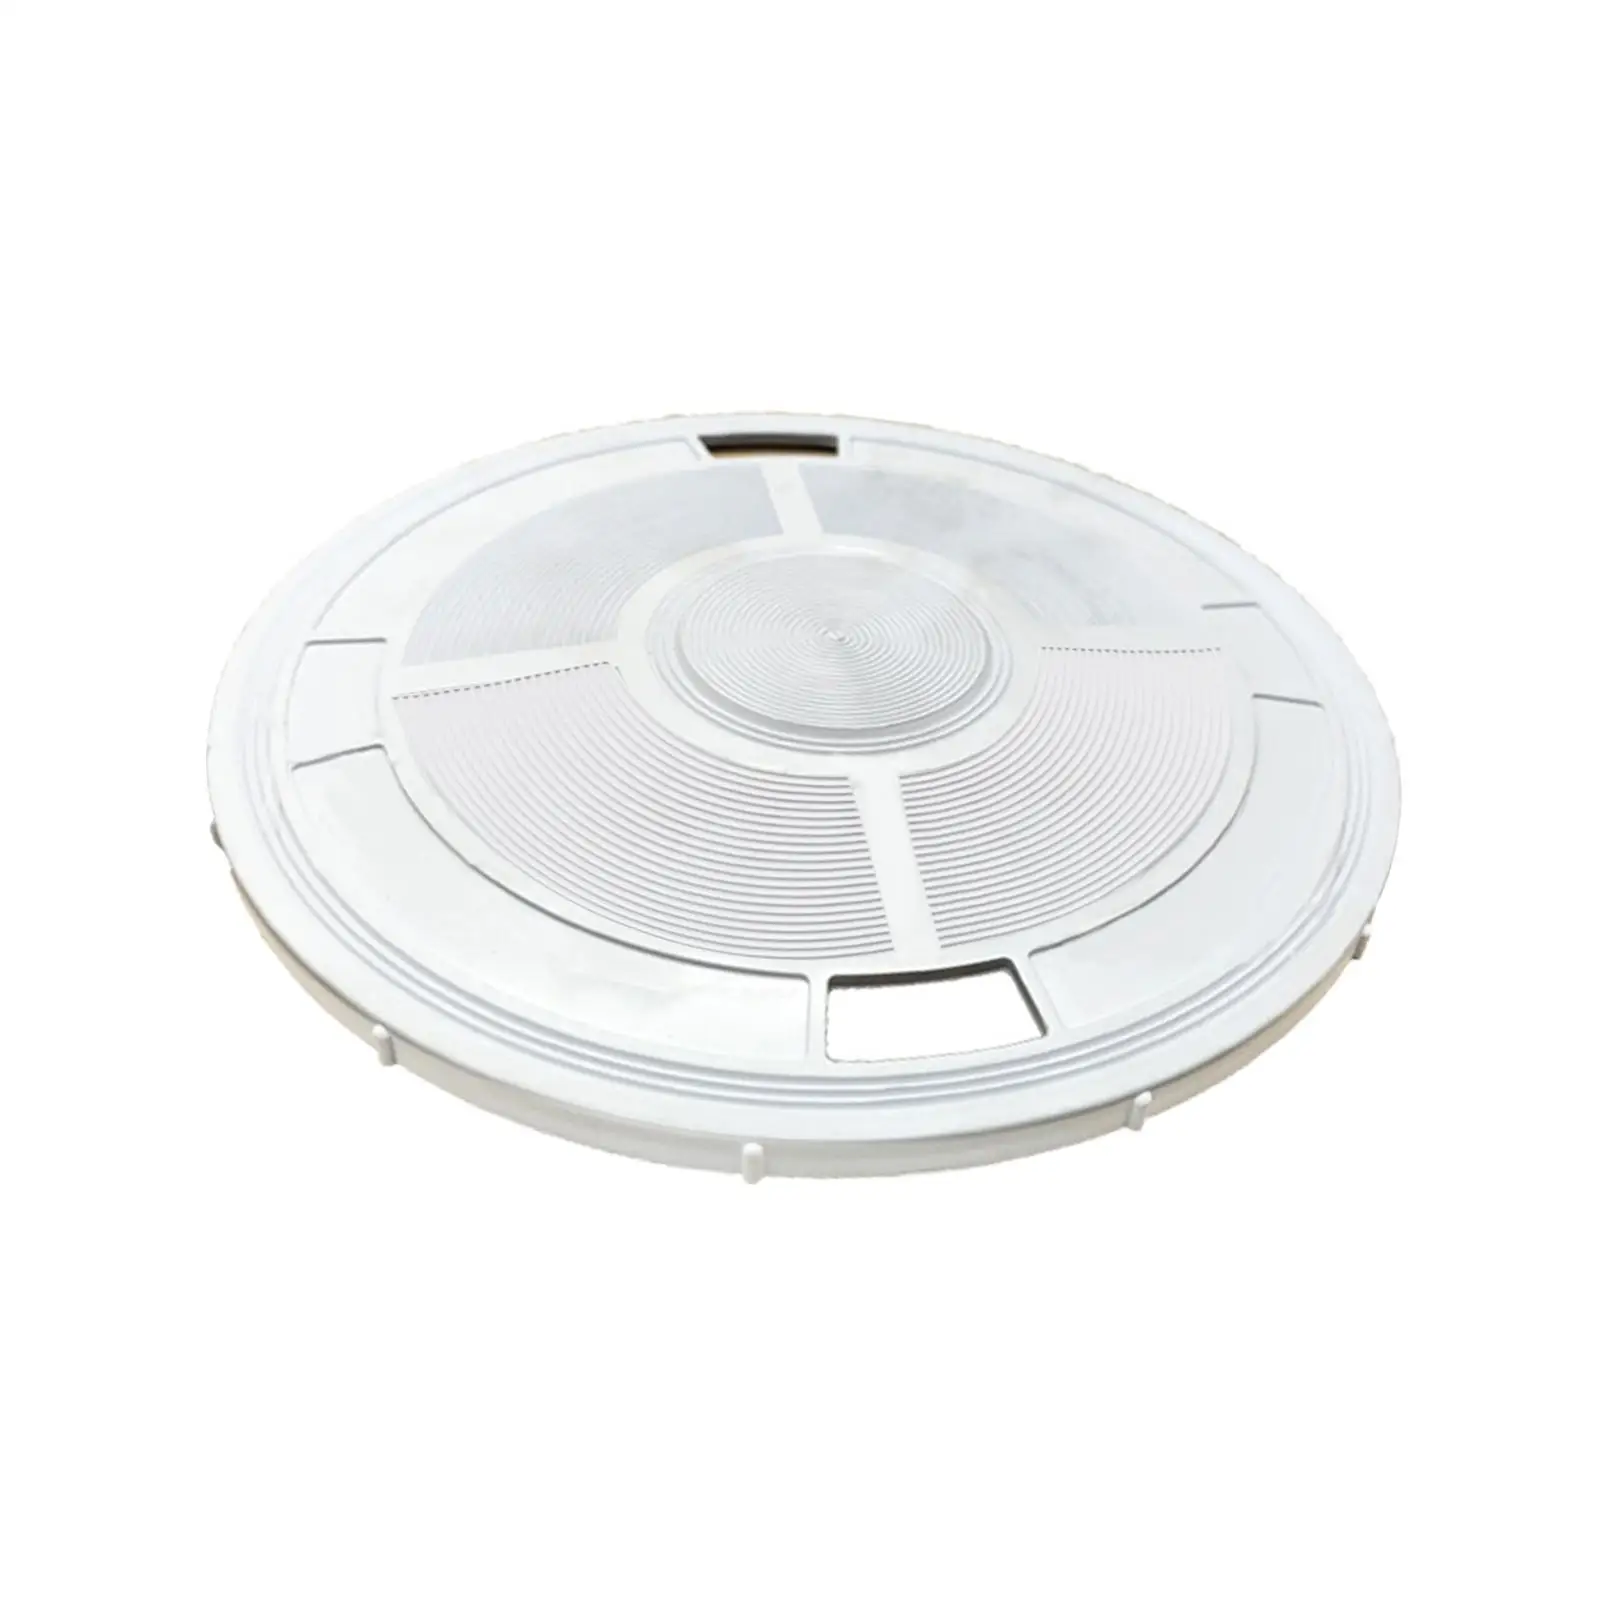 Pool Skimmer Lid Wear Resistant Automatic Skimmer Cover replacements for SP1091LX Swimming Above Ground/in Ground Pools